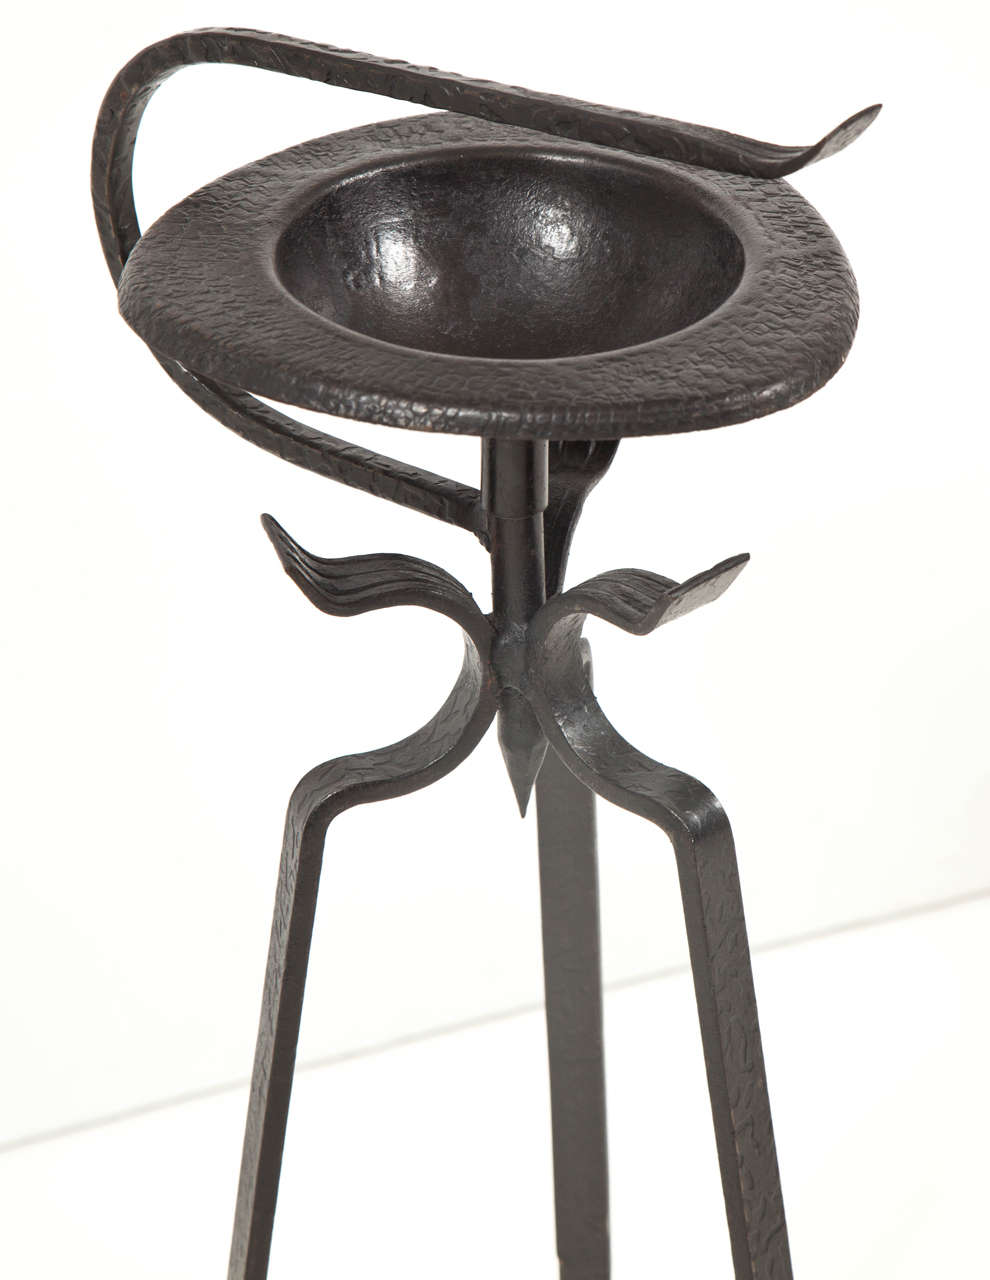 Hammered Hand-Forged French Smoking Stands